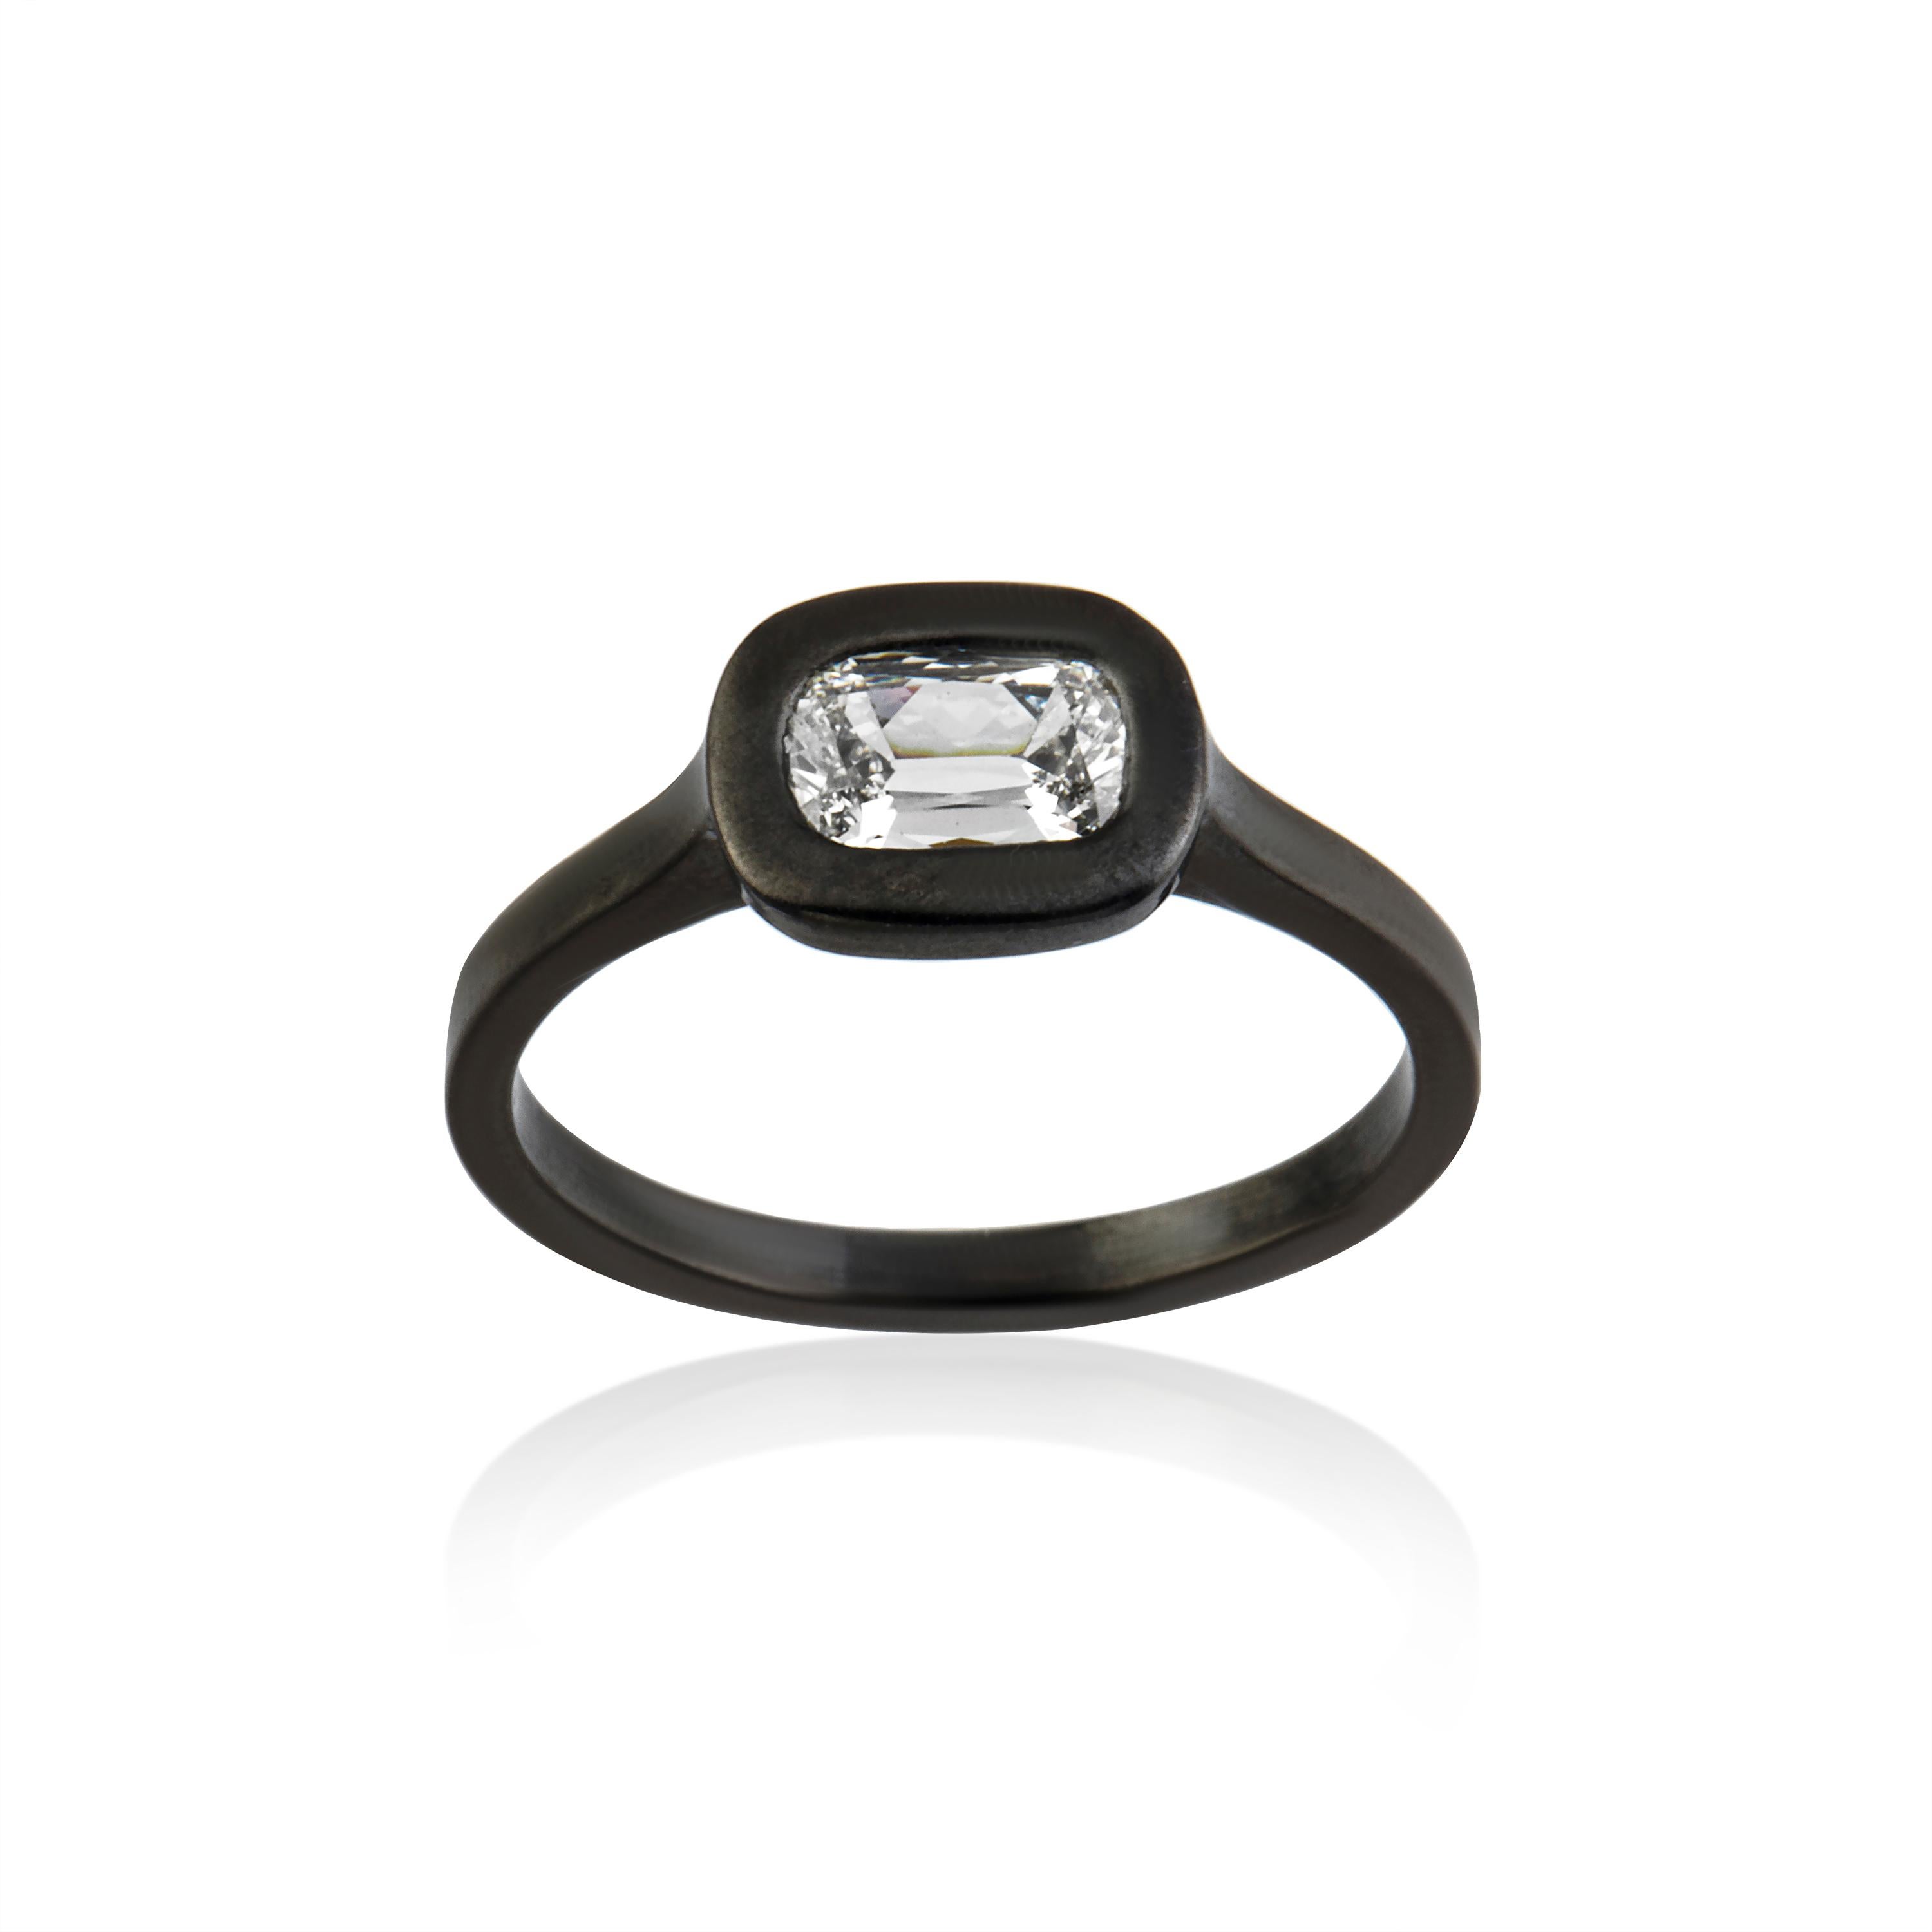 This Ring Features 0.63 Carat Oldcut Cushion I - VVS2 Gia Certified Diamond Set in 3.25 Gram 18 Karat Blackened Gold.
It is Hand Crafted in Istanbul.